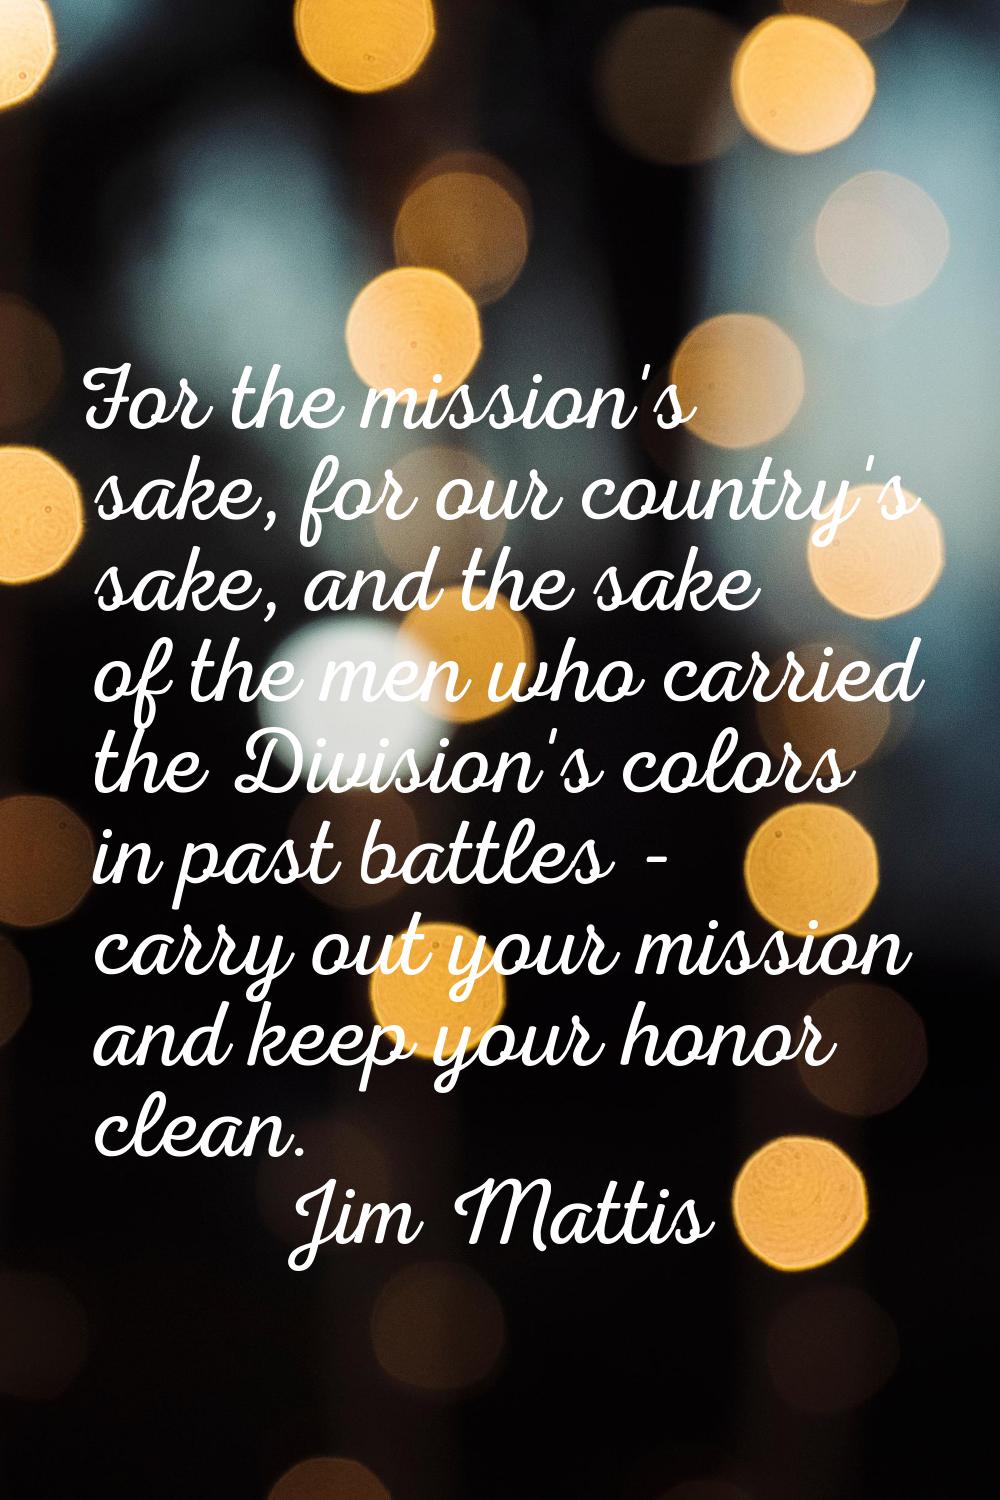 For the mission's sake, for our country's sake, and the sake of the men who carried the Division's 